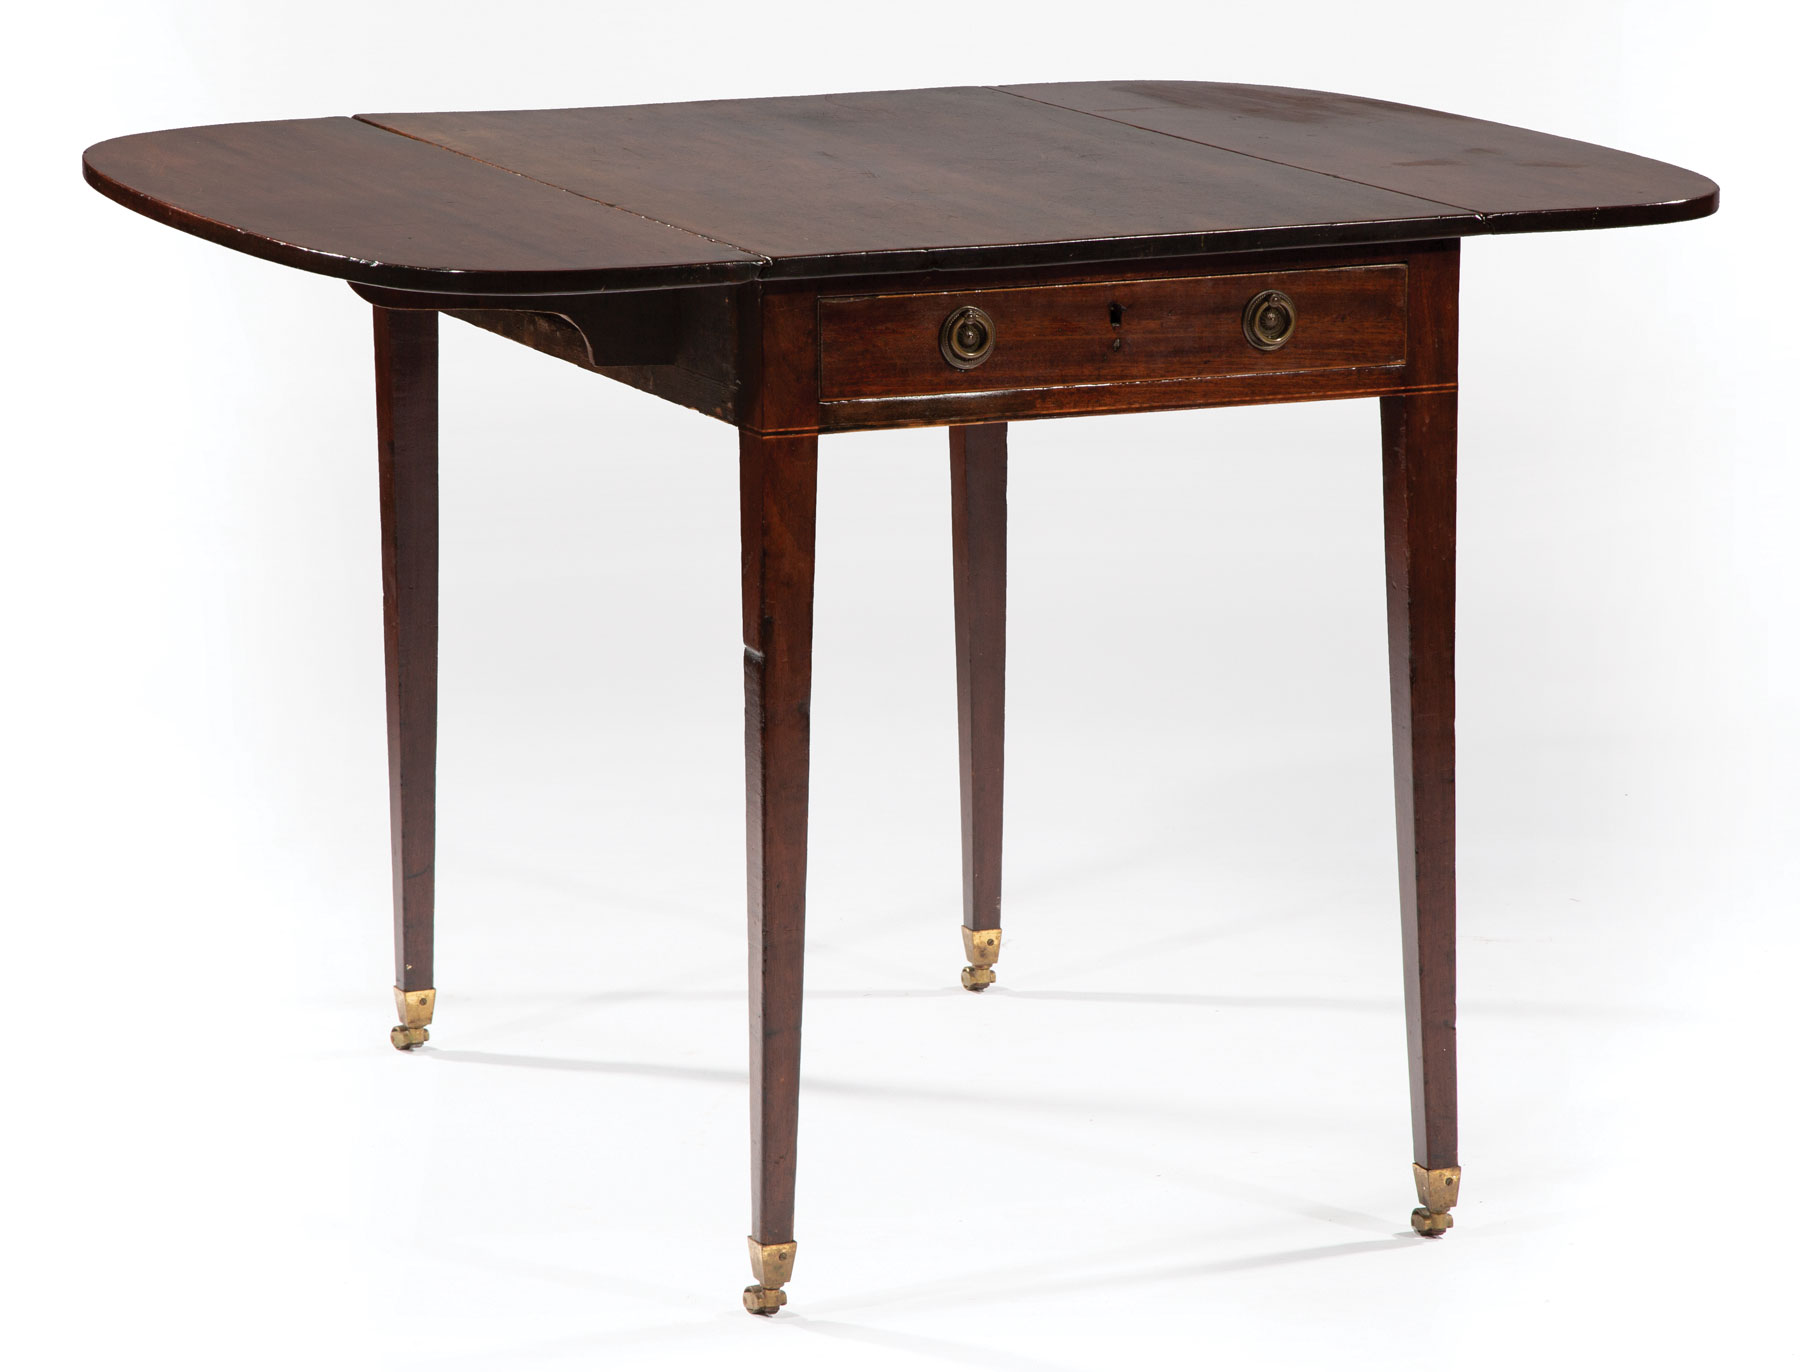 George III Inlaid Mahogany Pembroke Table , late 18th c., shaped drop-leaf top, single drawer, - Image 2 of 2